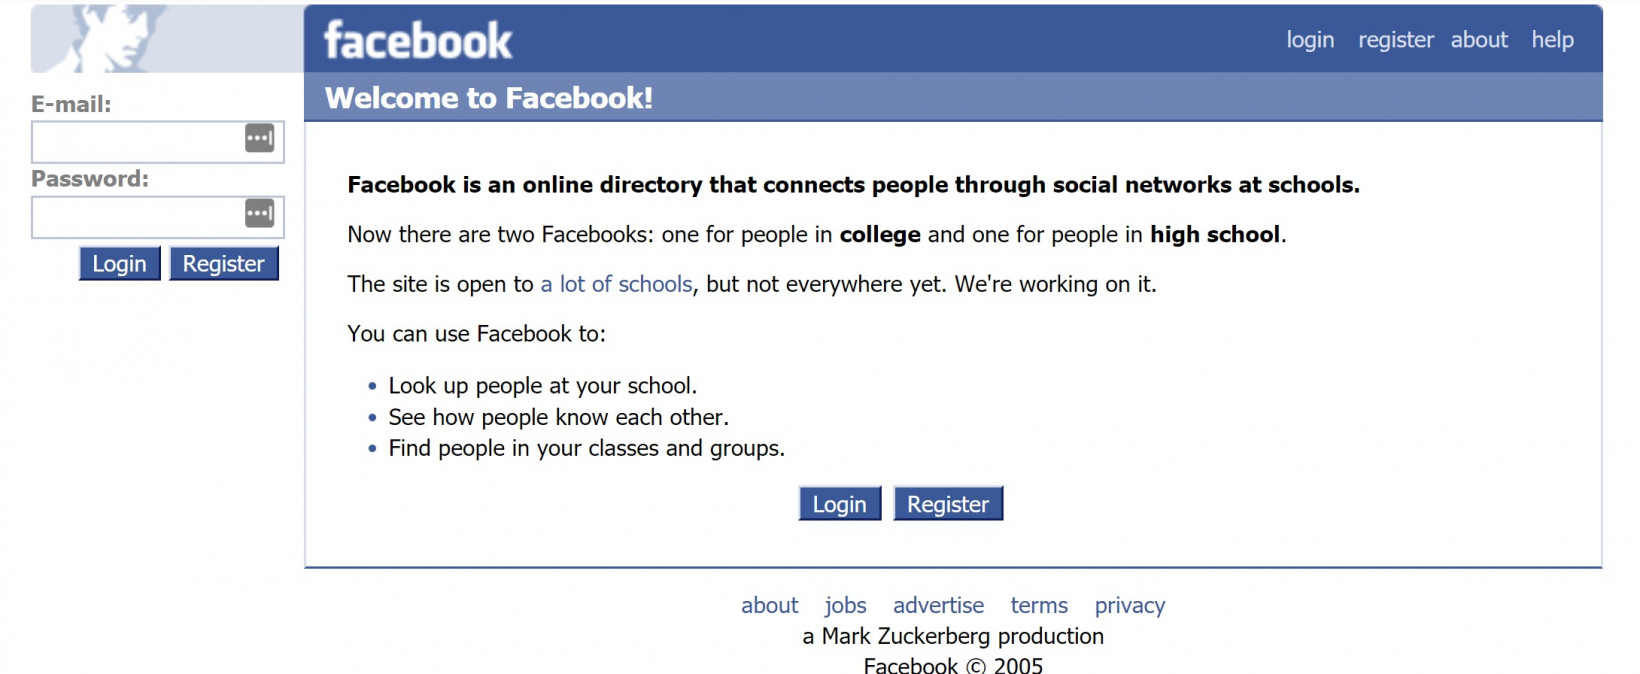 In 2004 Facebook was a social networking website for colleges however by 20...